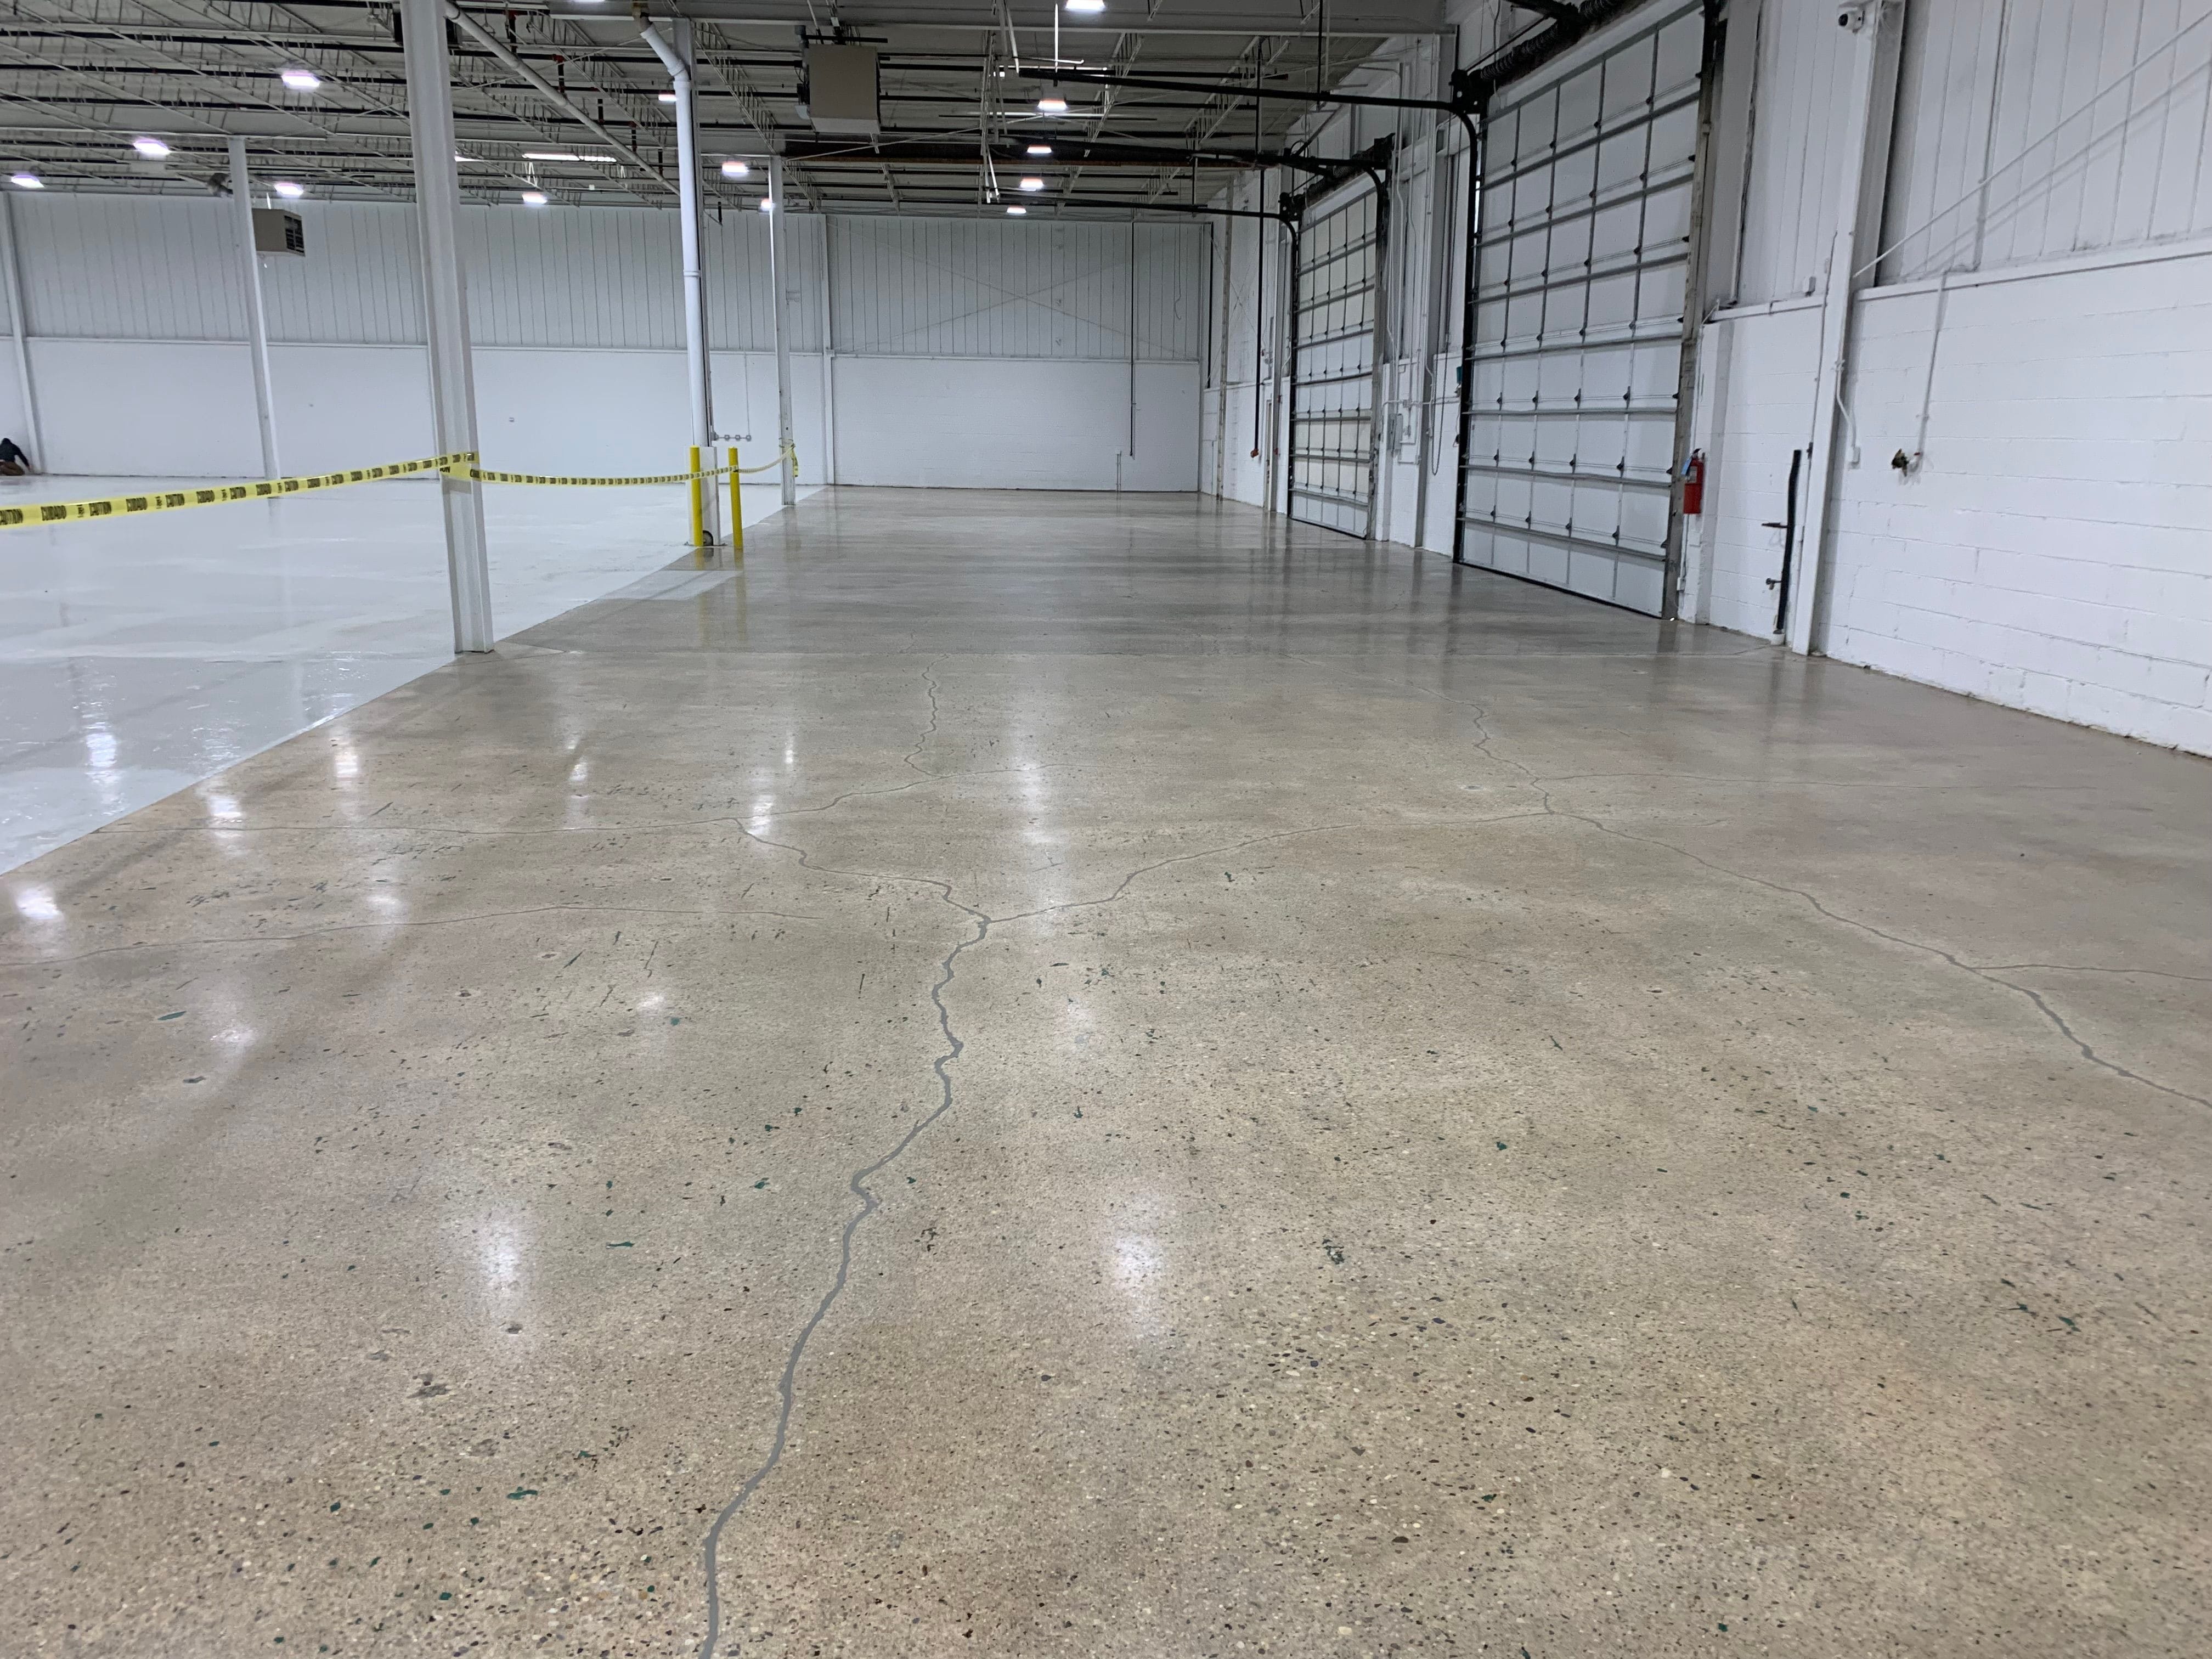 concrete polish in office space